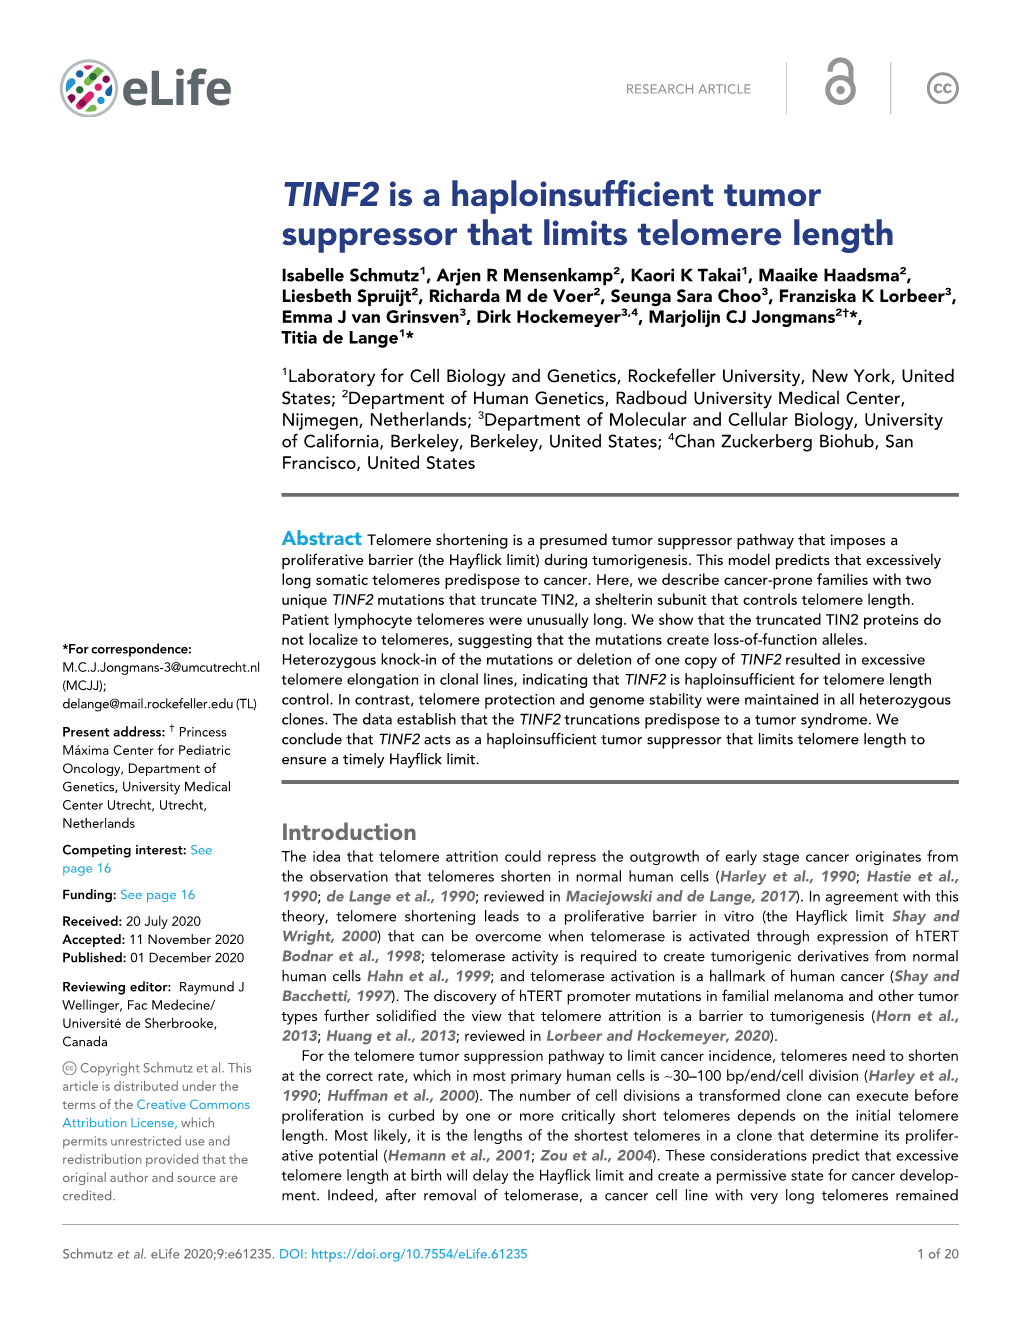 TINF2 Is a Haploinsufficient Tumor Suppressor That Limits